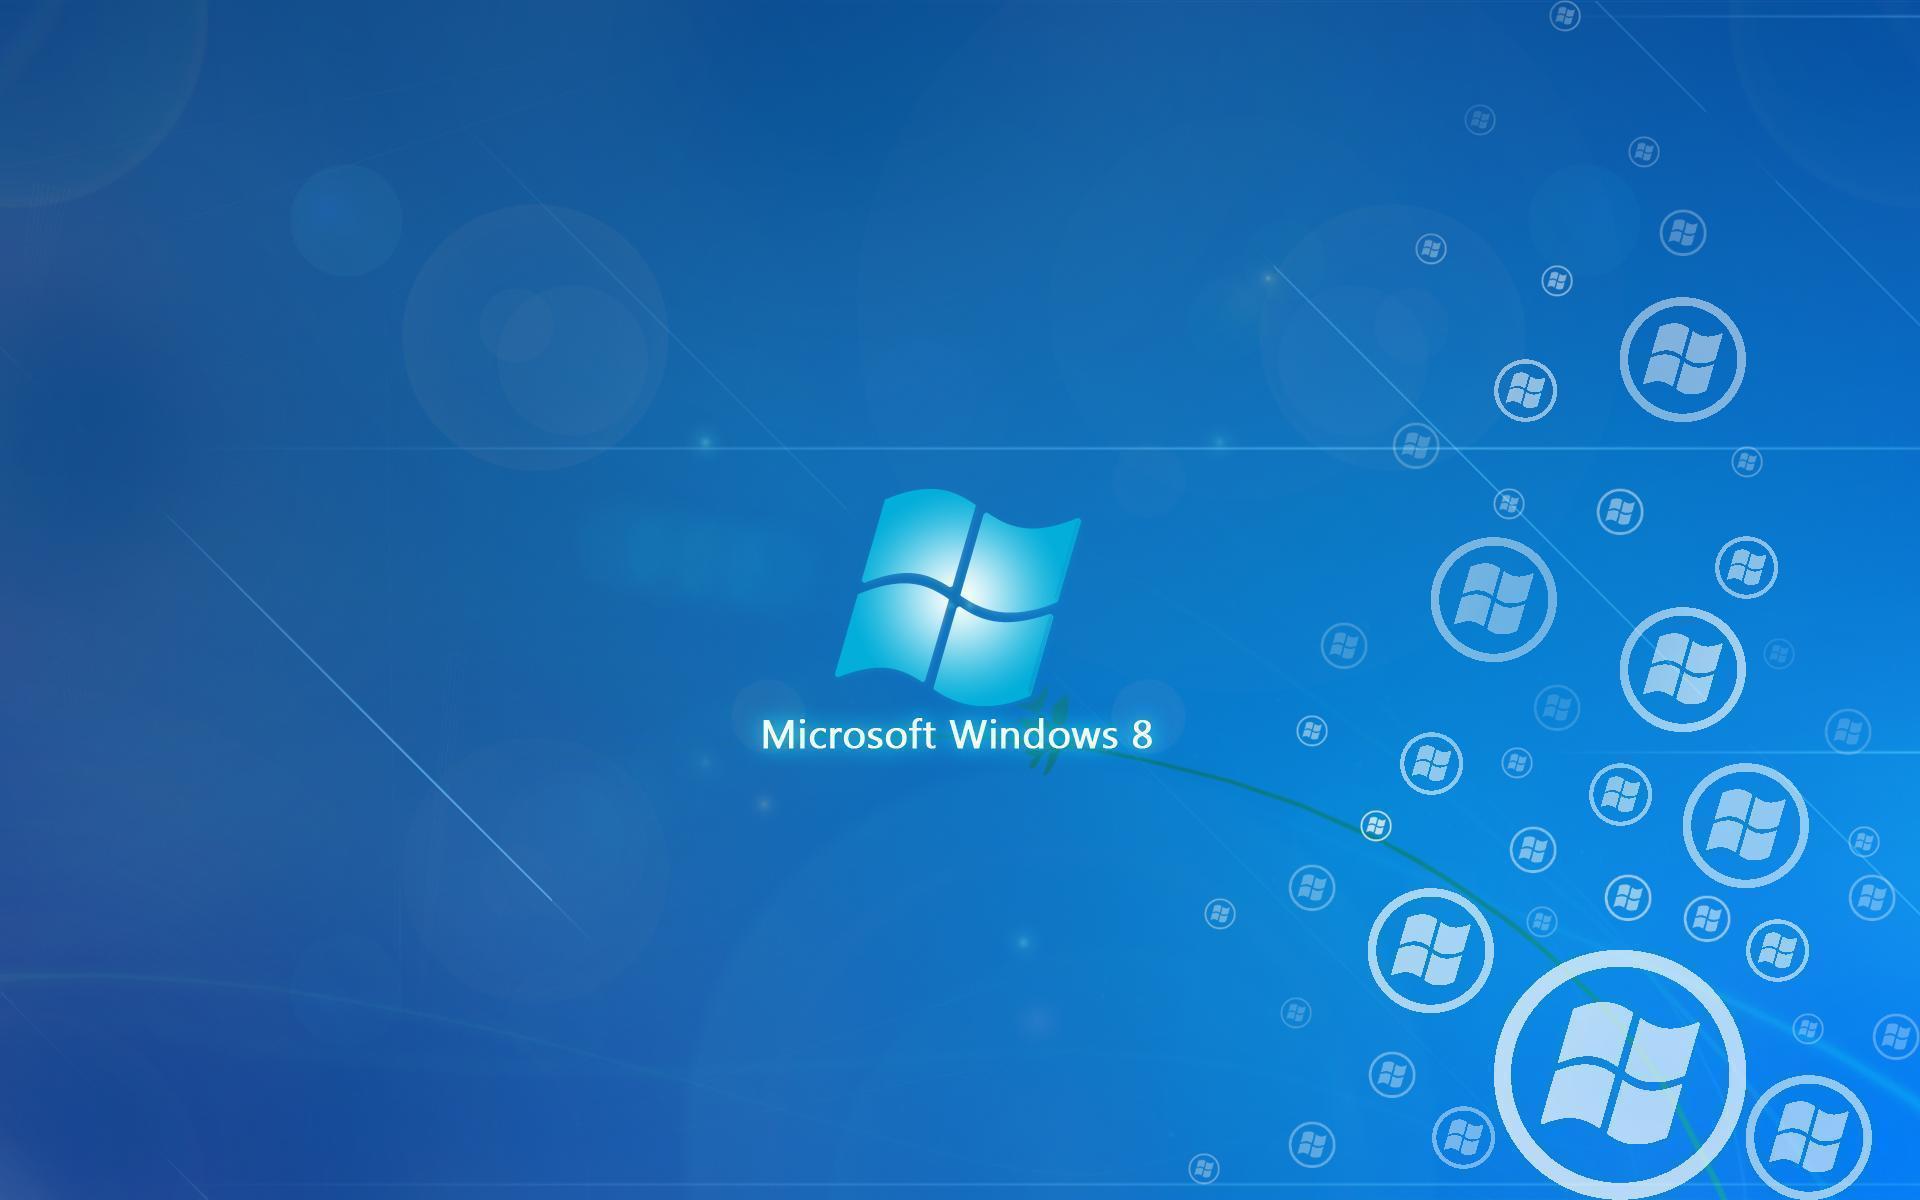 Windows 8 Wallpaper that You Must Have